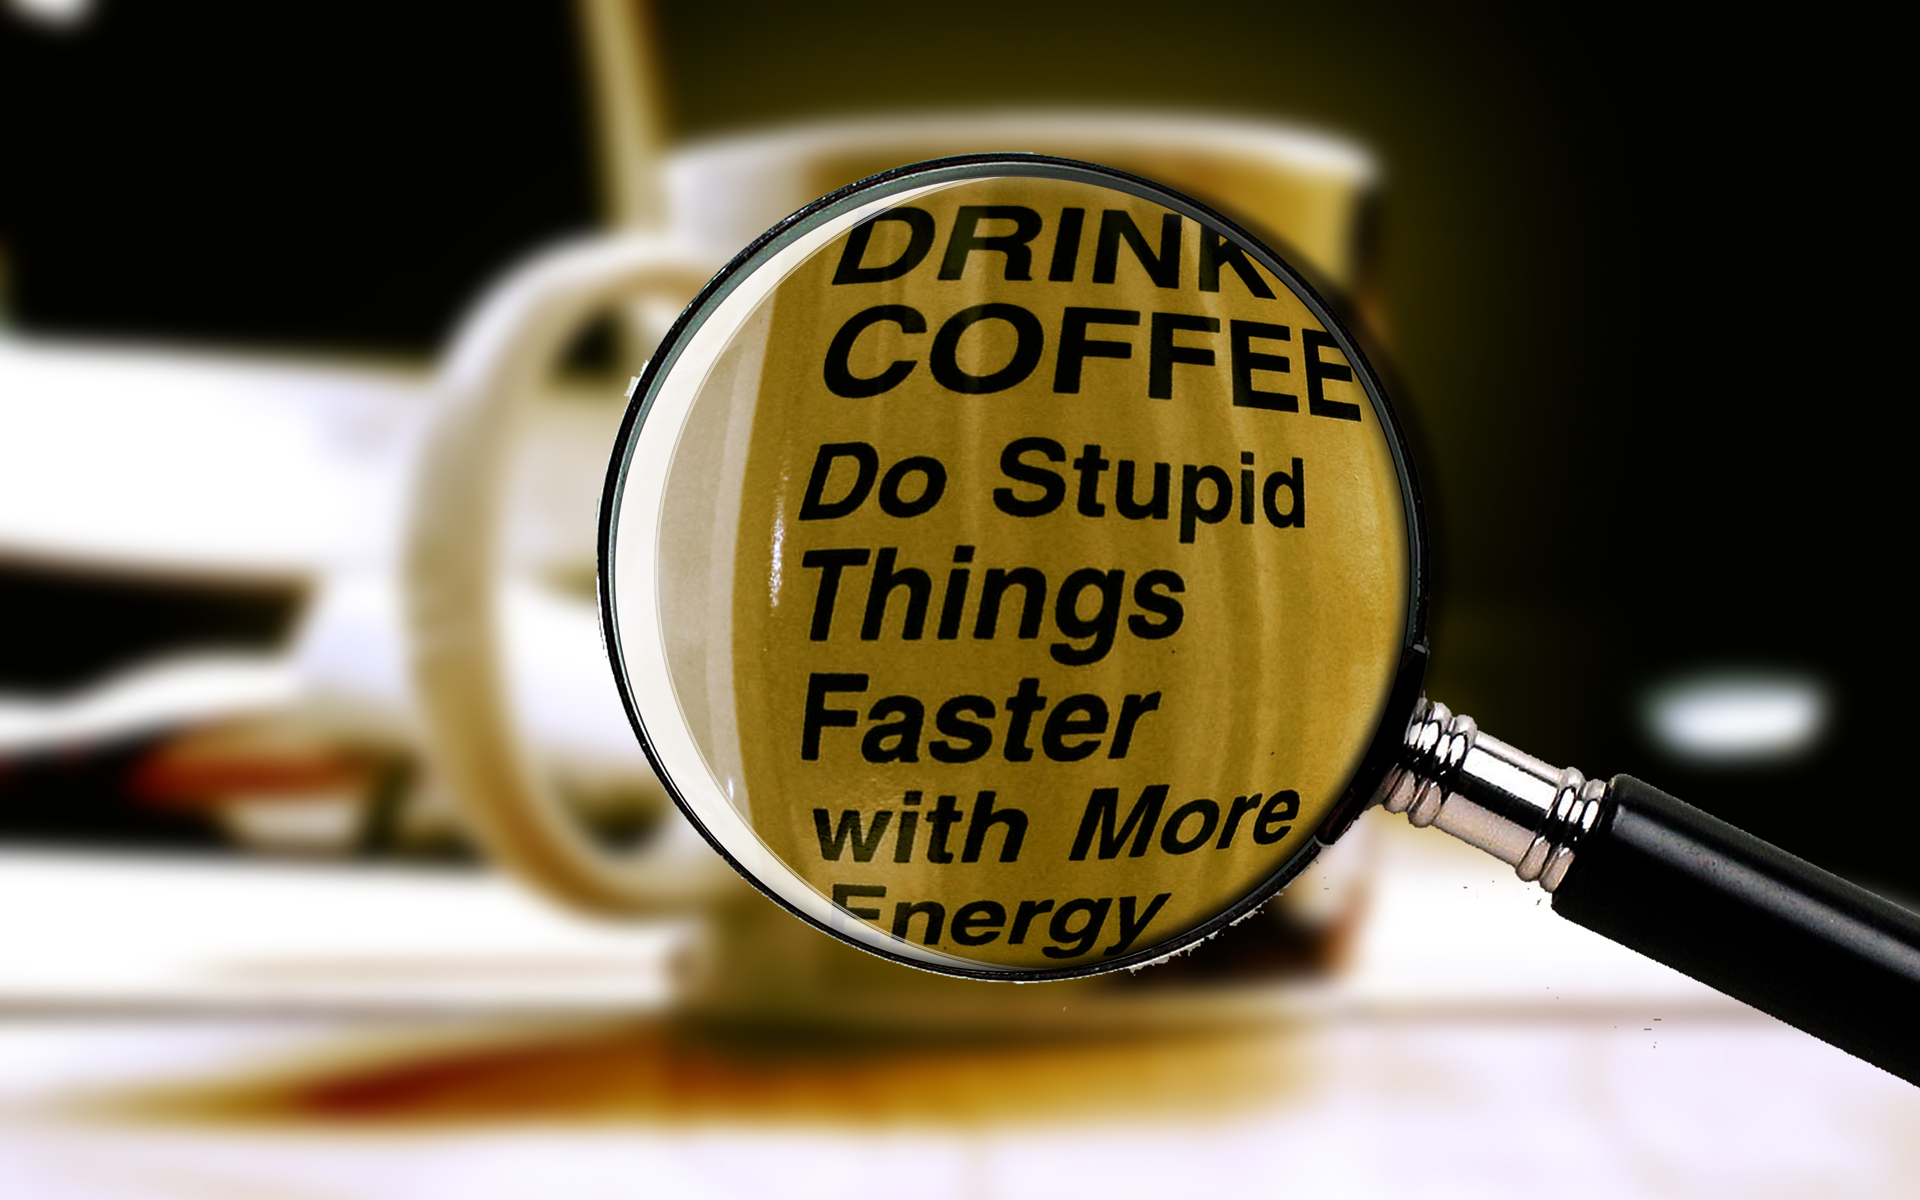 drink coffee do stupid things faster with more energy wallpaper – Core Dump